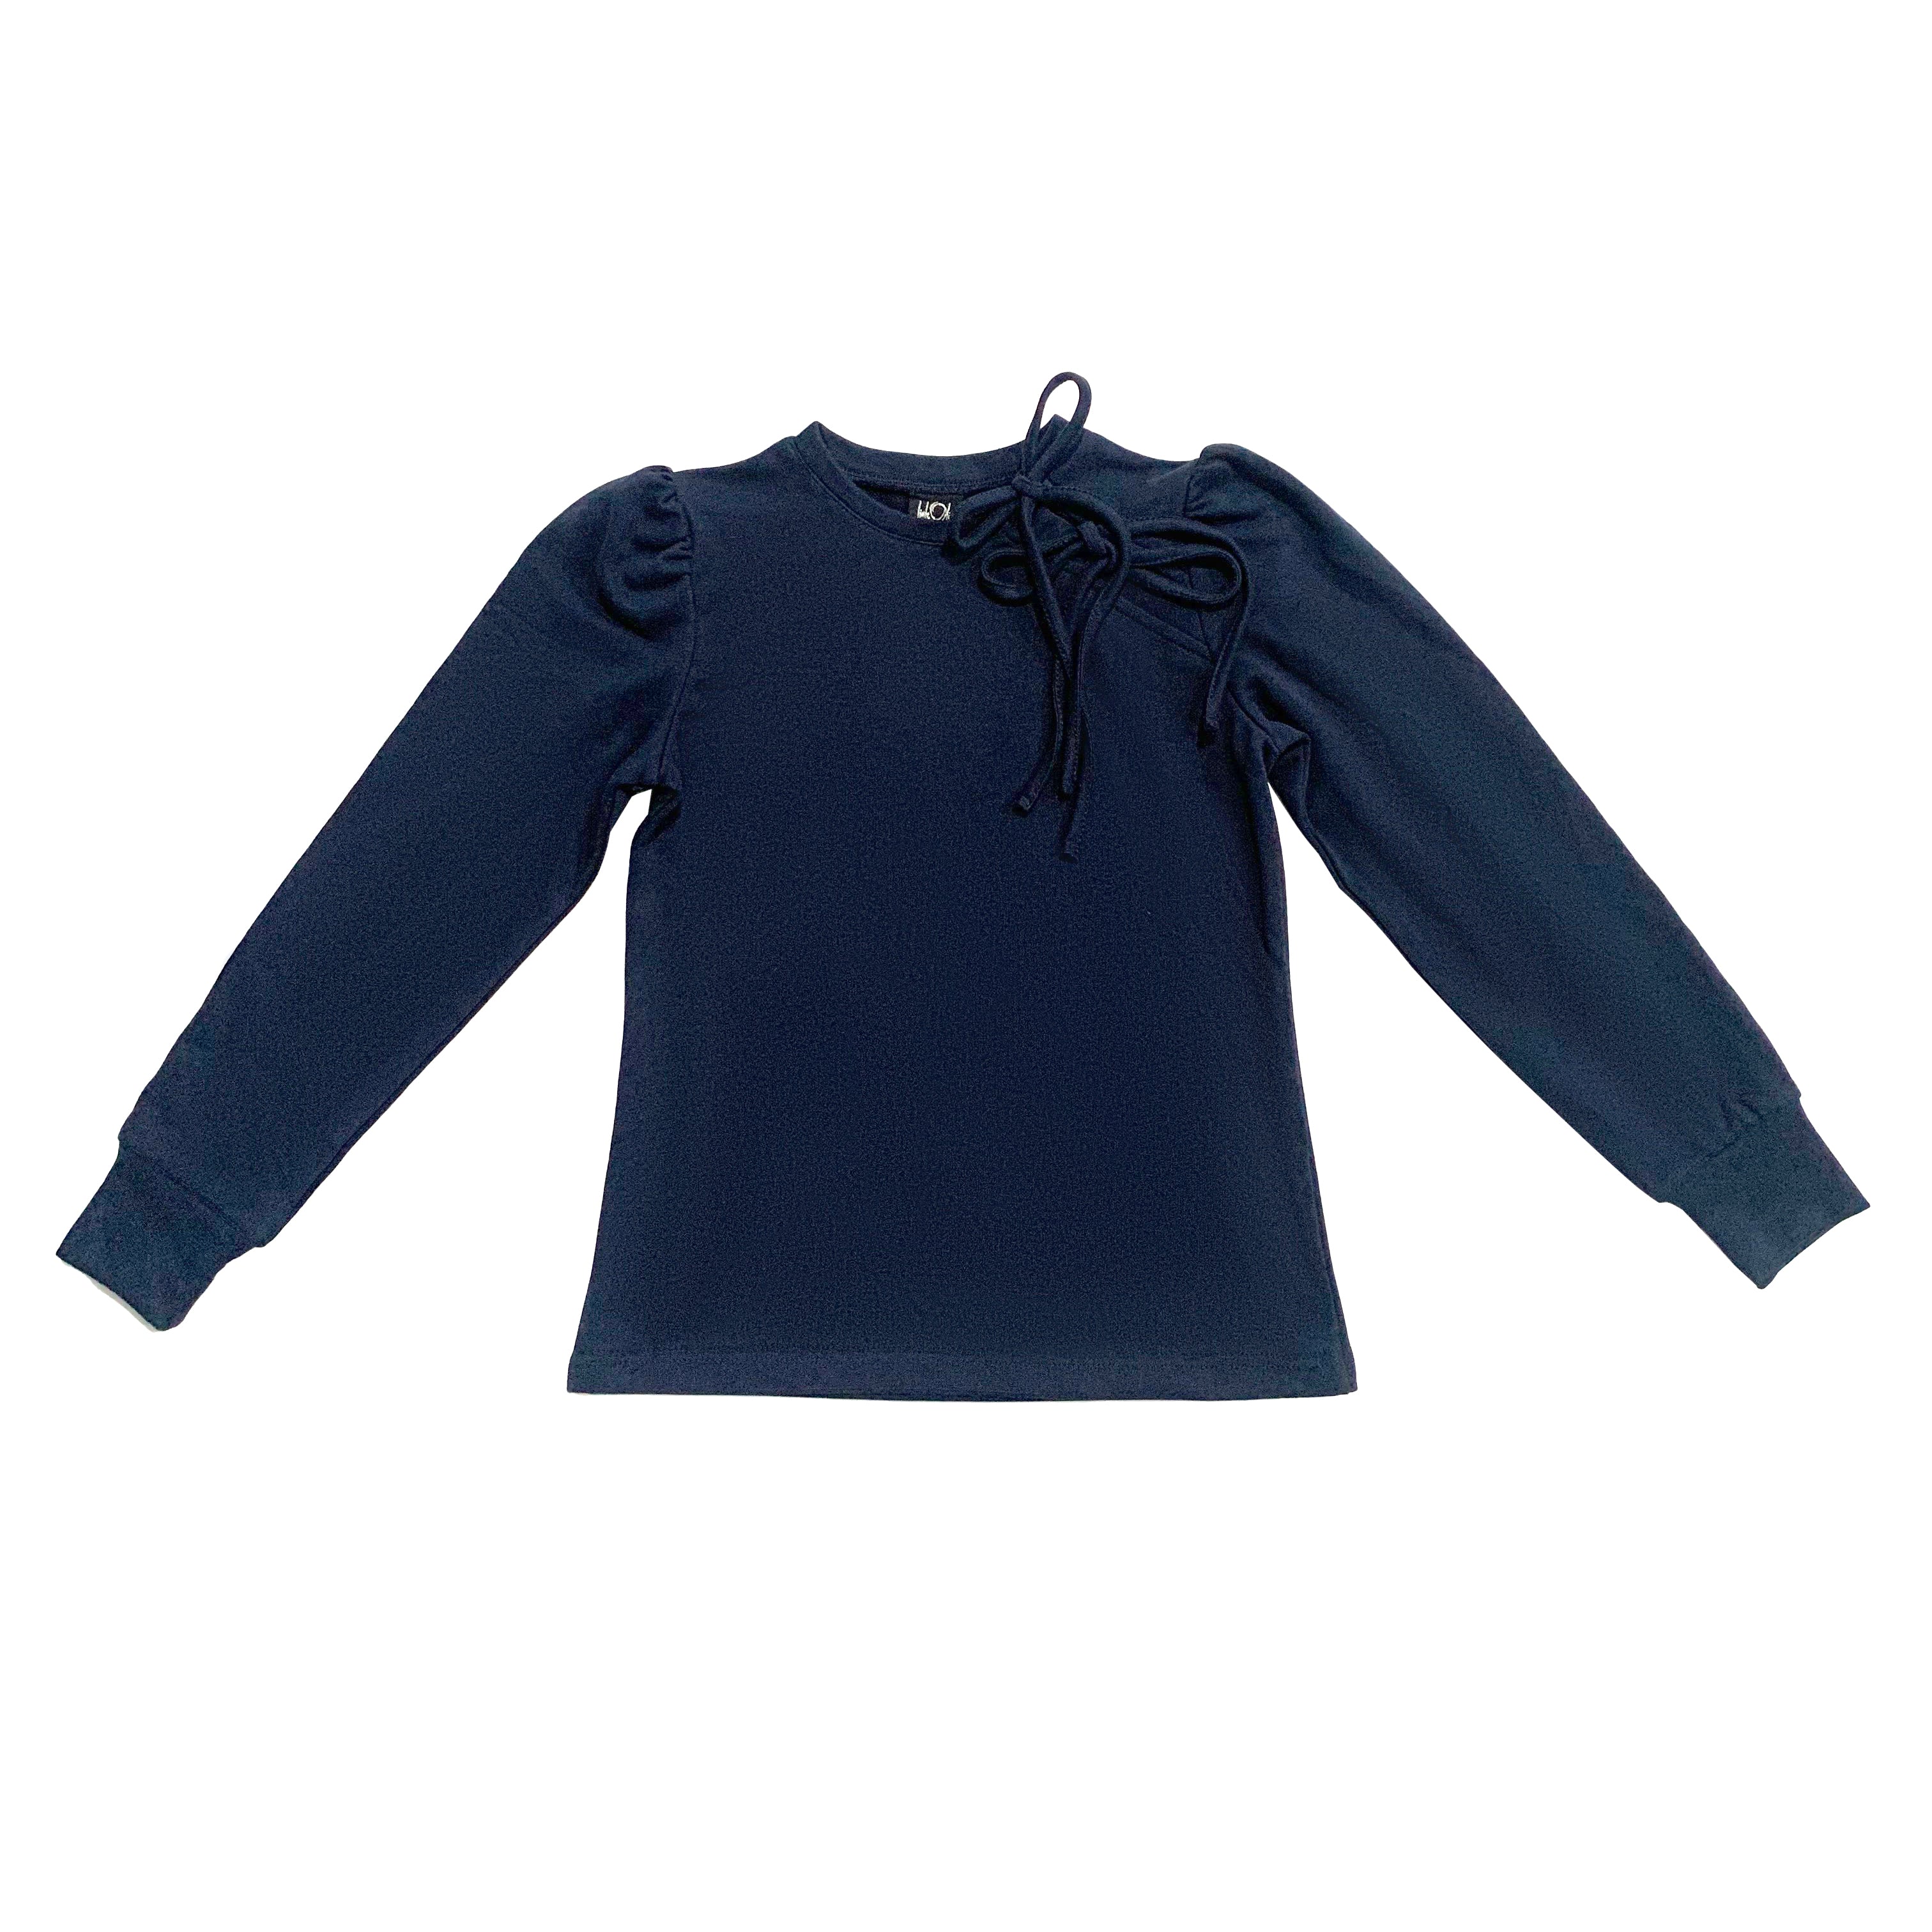 Navy Tie Top with Gathered WS Sleeve